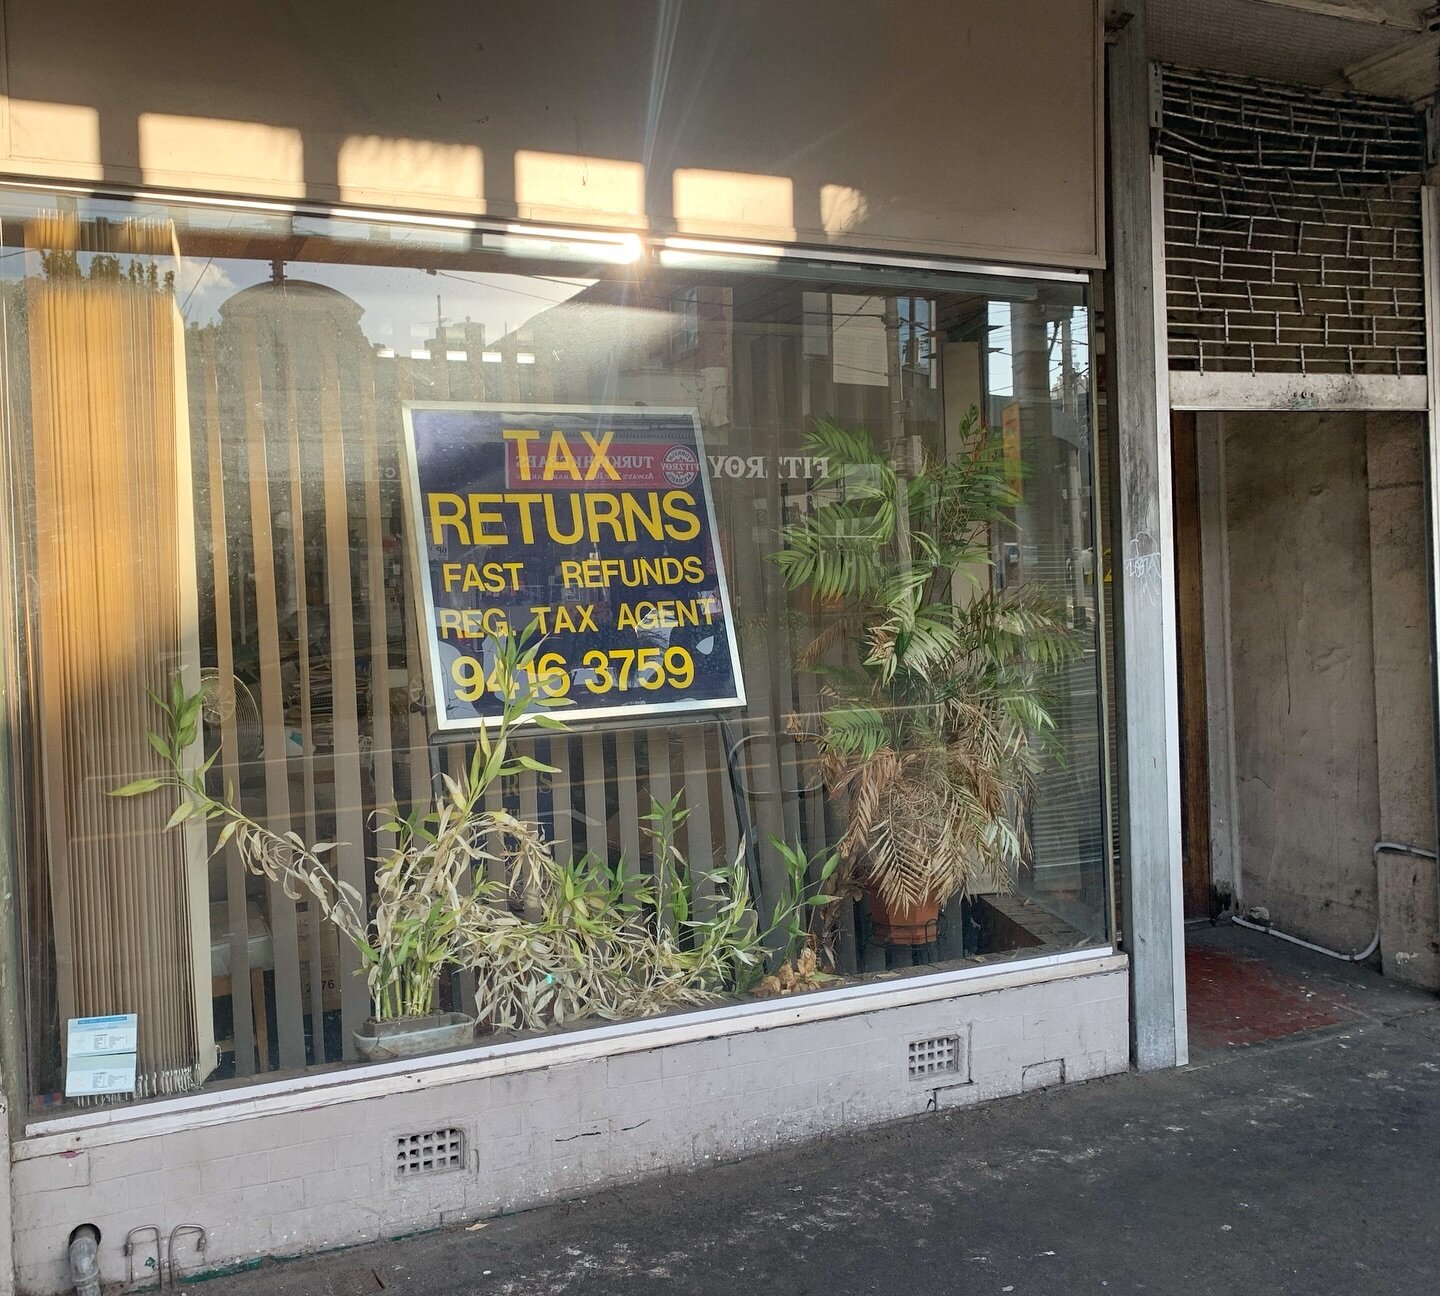 Just round the corner on Smith. One of the most iconic and enduring shop windows of our neighbourhood. Sad to see this one go. #taxreturns #shopwindows #peopleofgertrudestreet